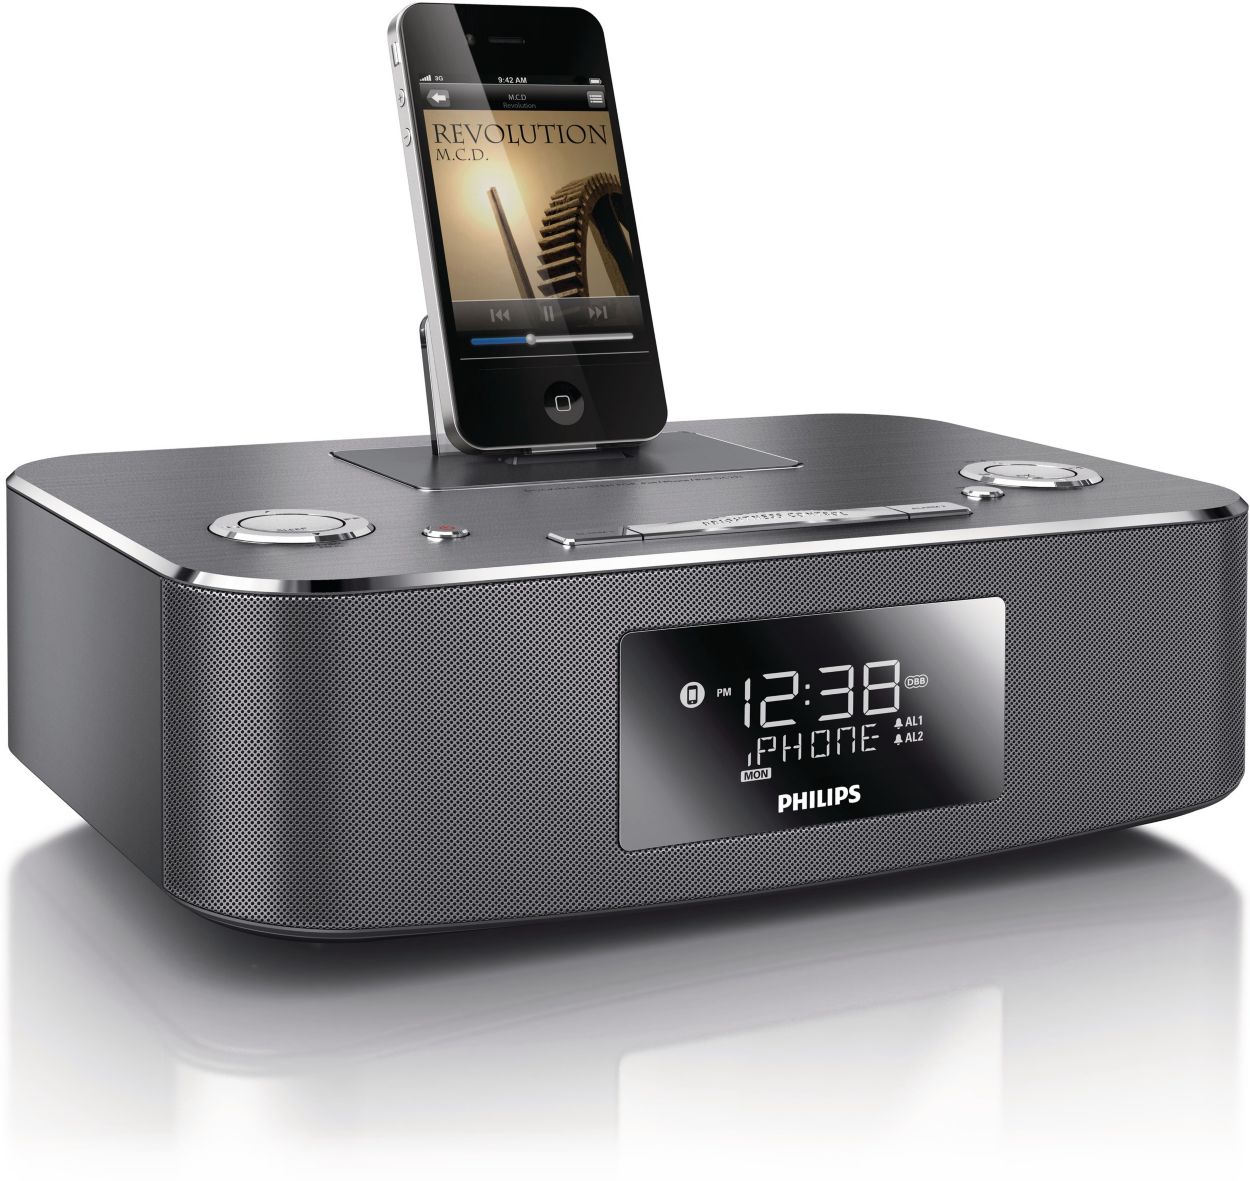 Docking Station For Ipod Iphone Ipad Dc291 37 Philips